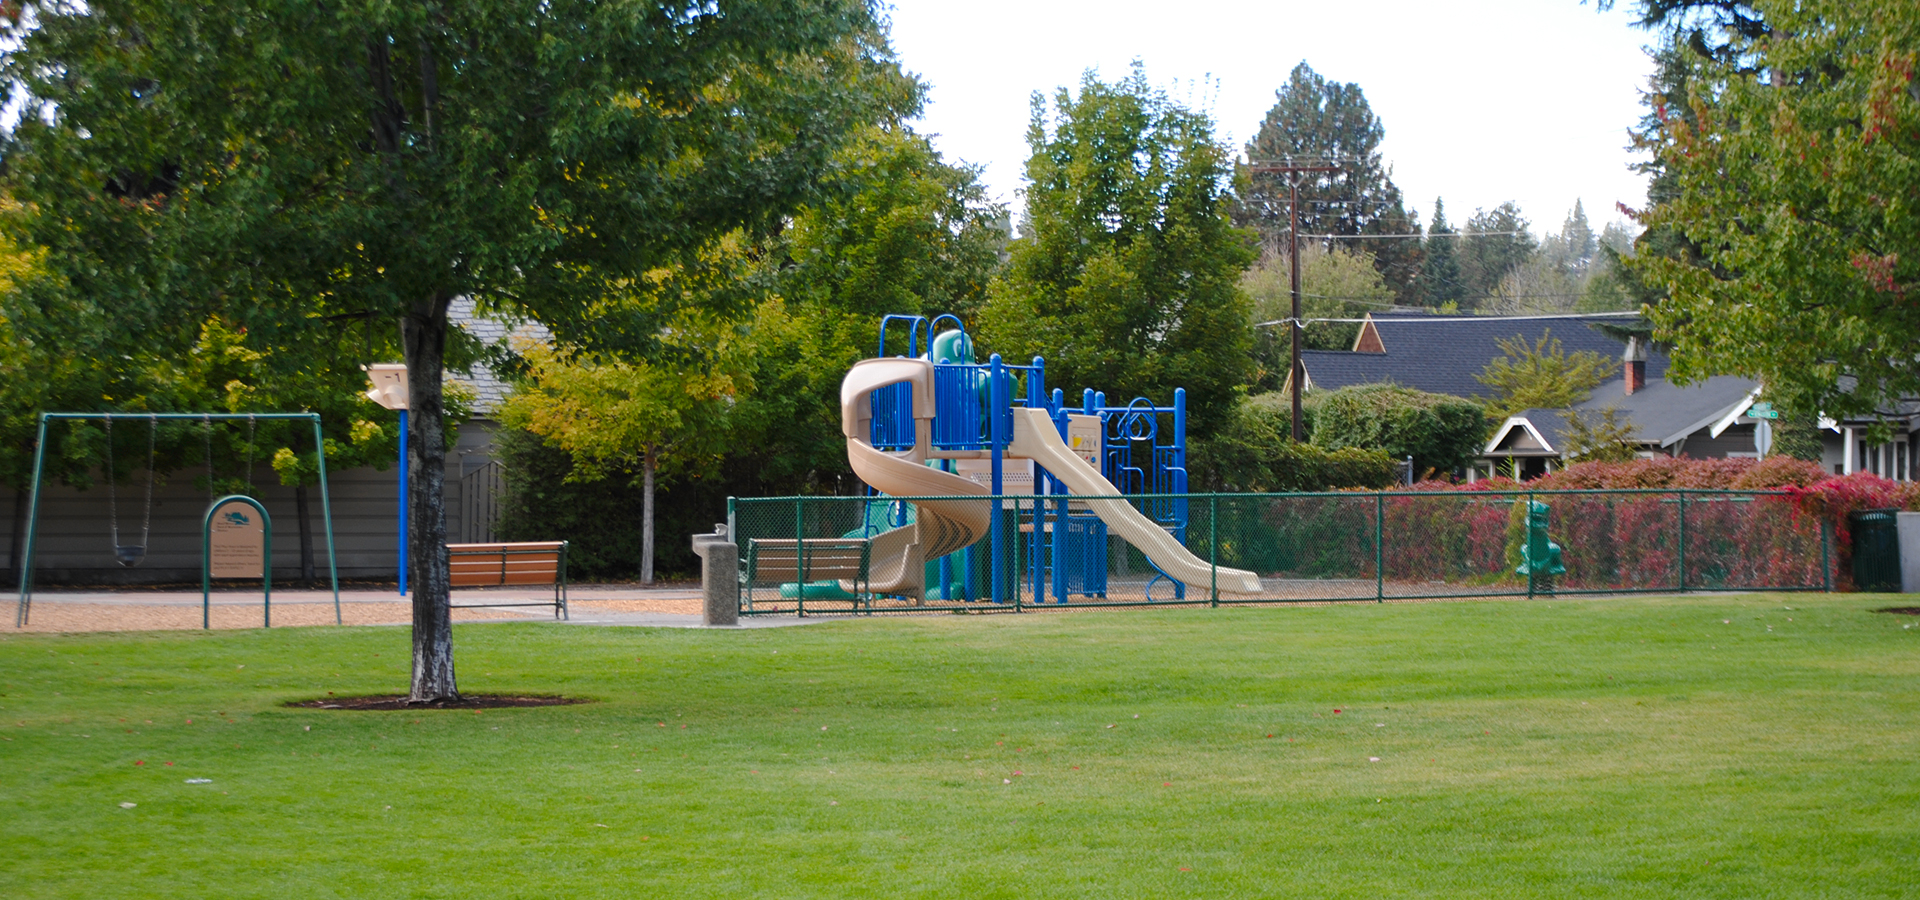 The play structure at Harmon Park.